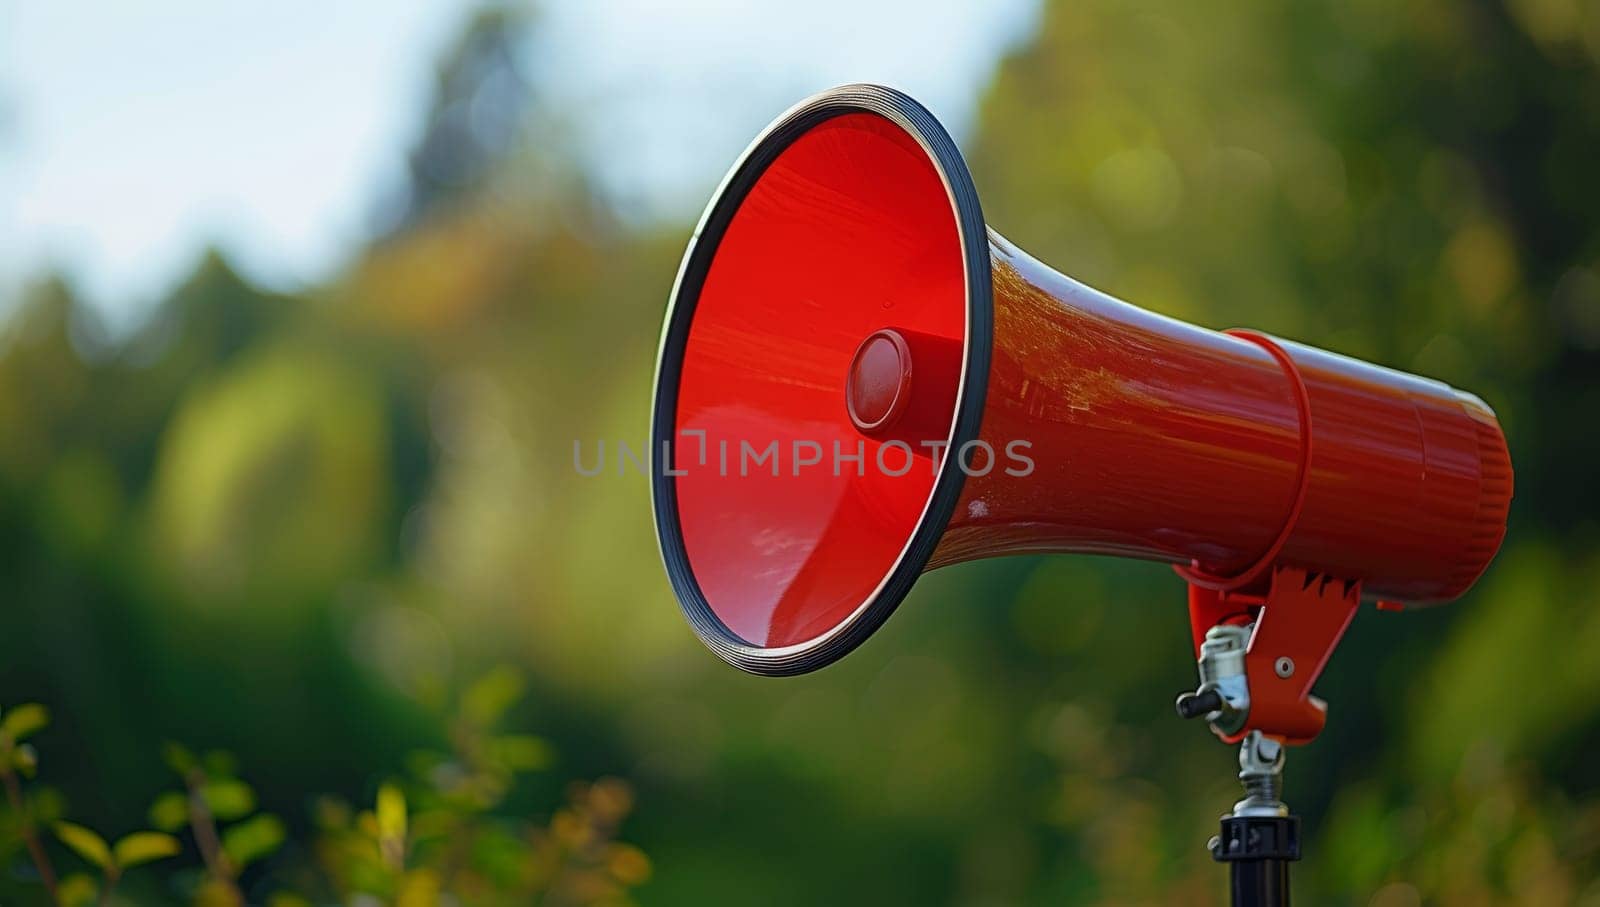 Red megaphone in natural outdoor setting by ailike